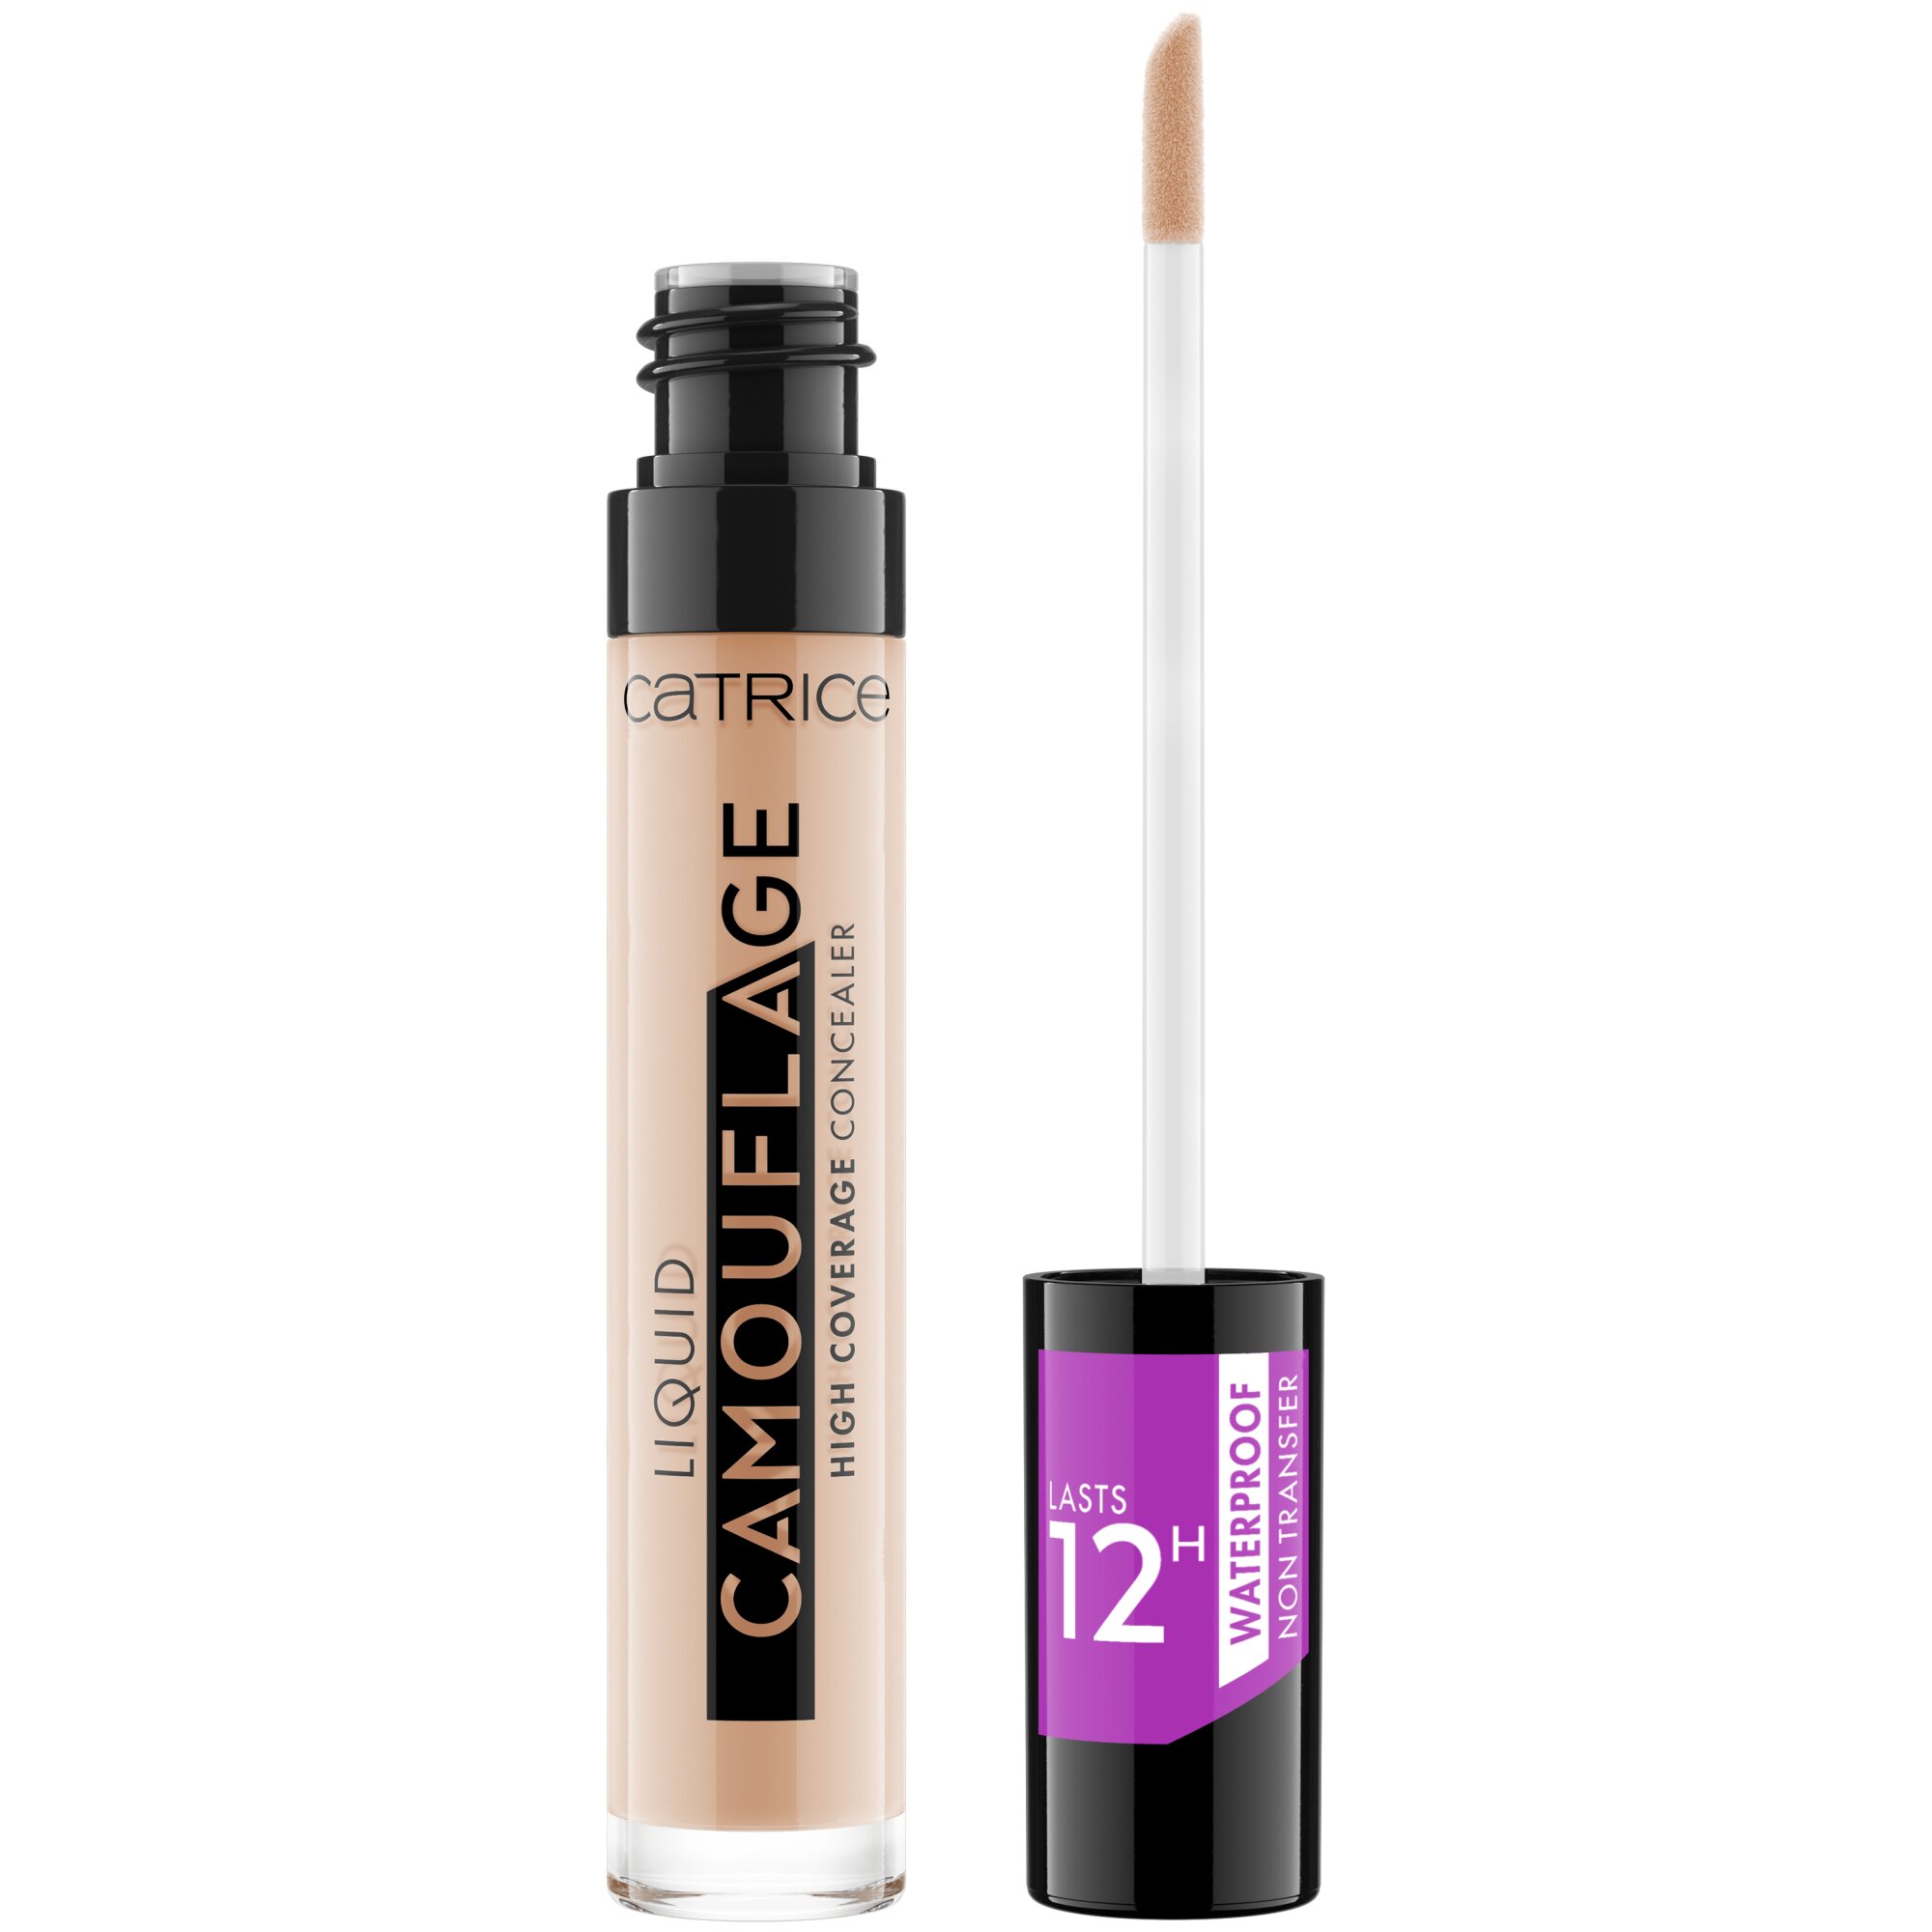 Corector lichid Camouflage High Coverage, Nuanta 005 - Light Natural, 5 ml, Catrice